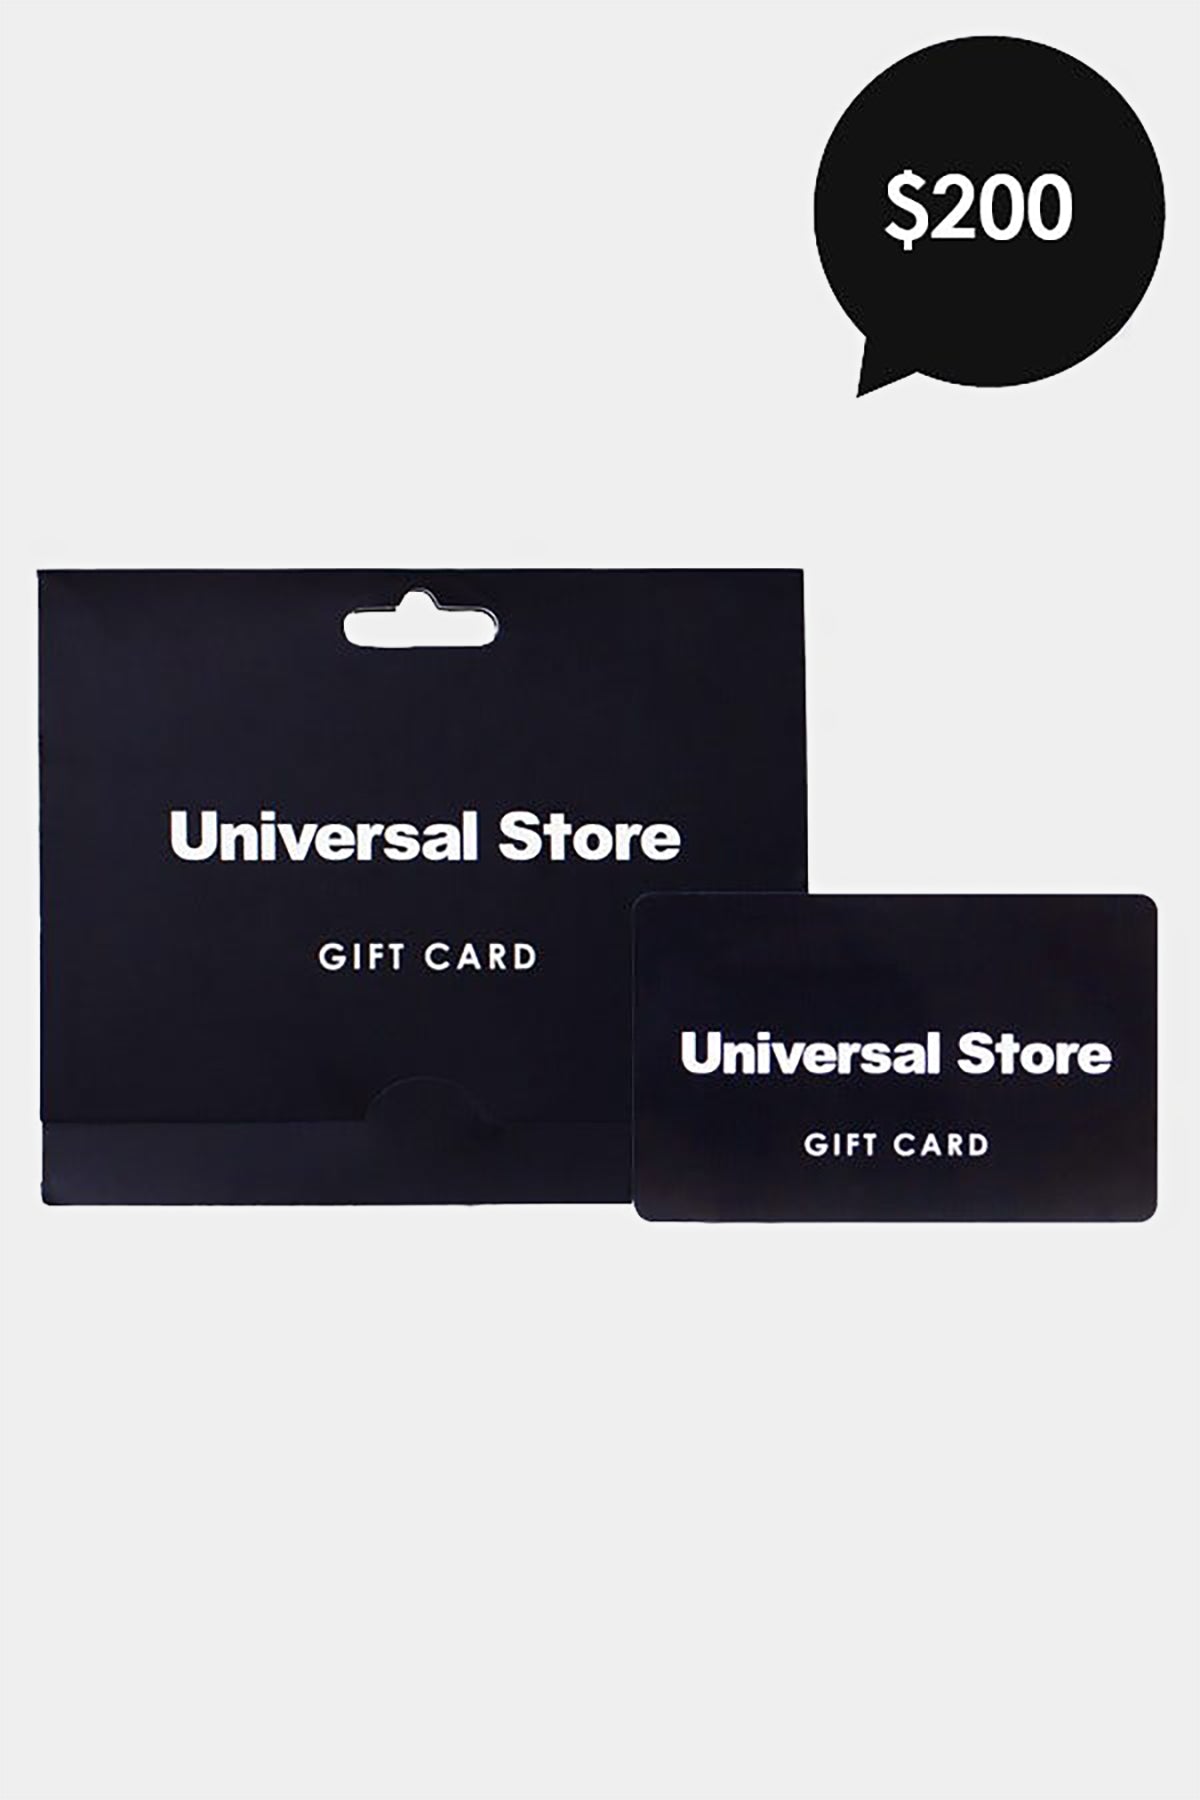 Universal Store $200 Gift Card